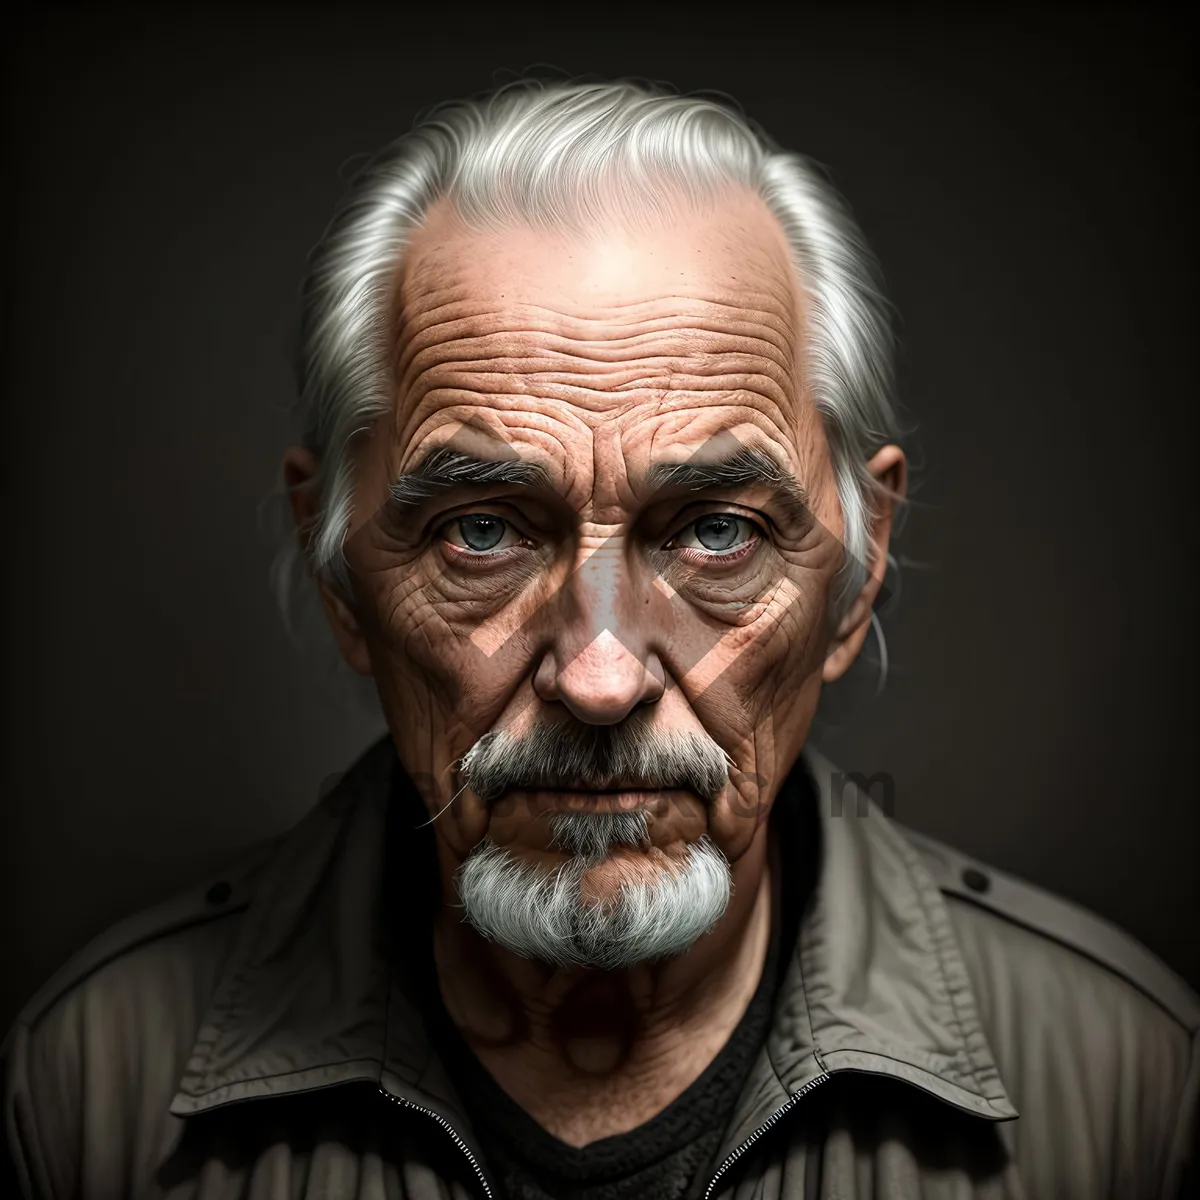 Picture of Serious Elderly Gentleman with Expressive Eyes